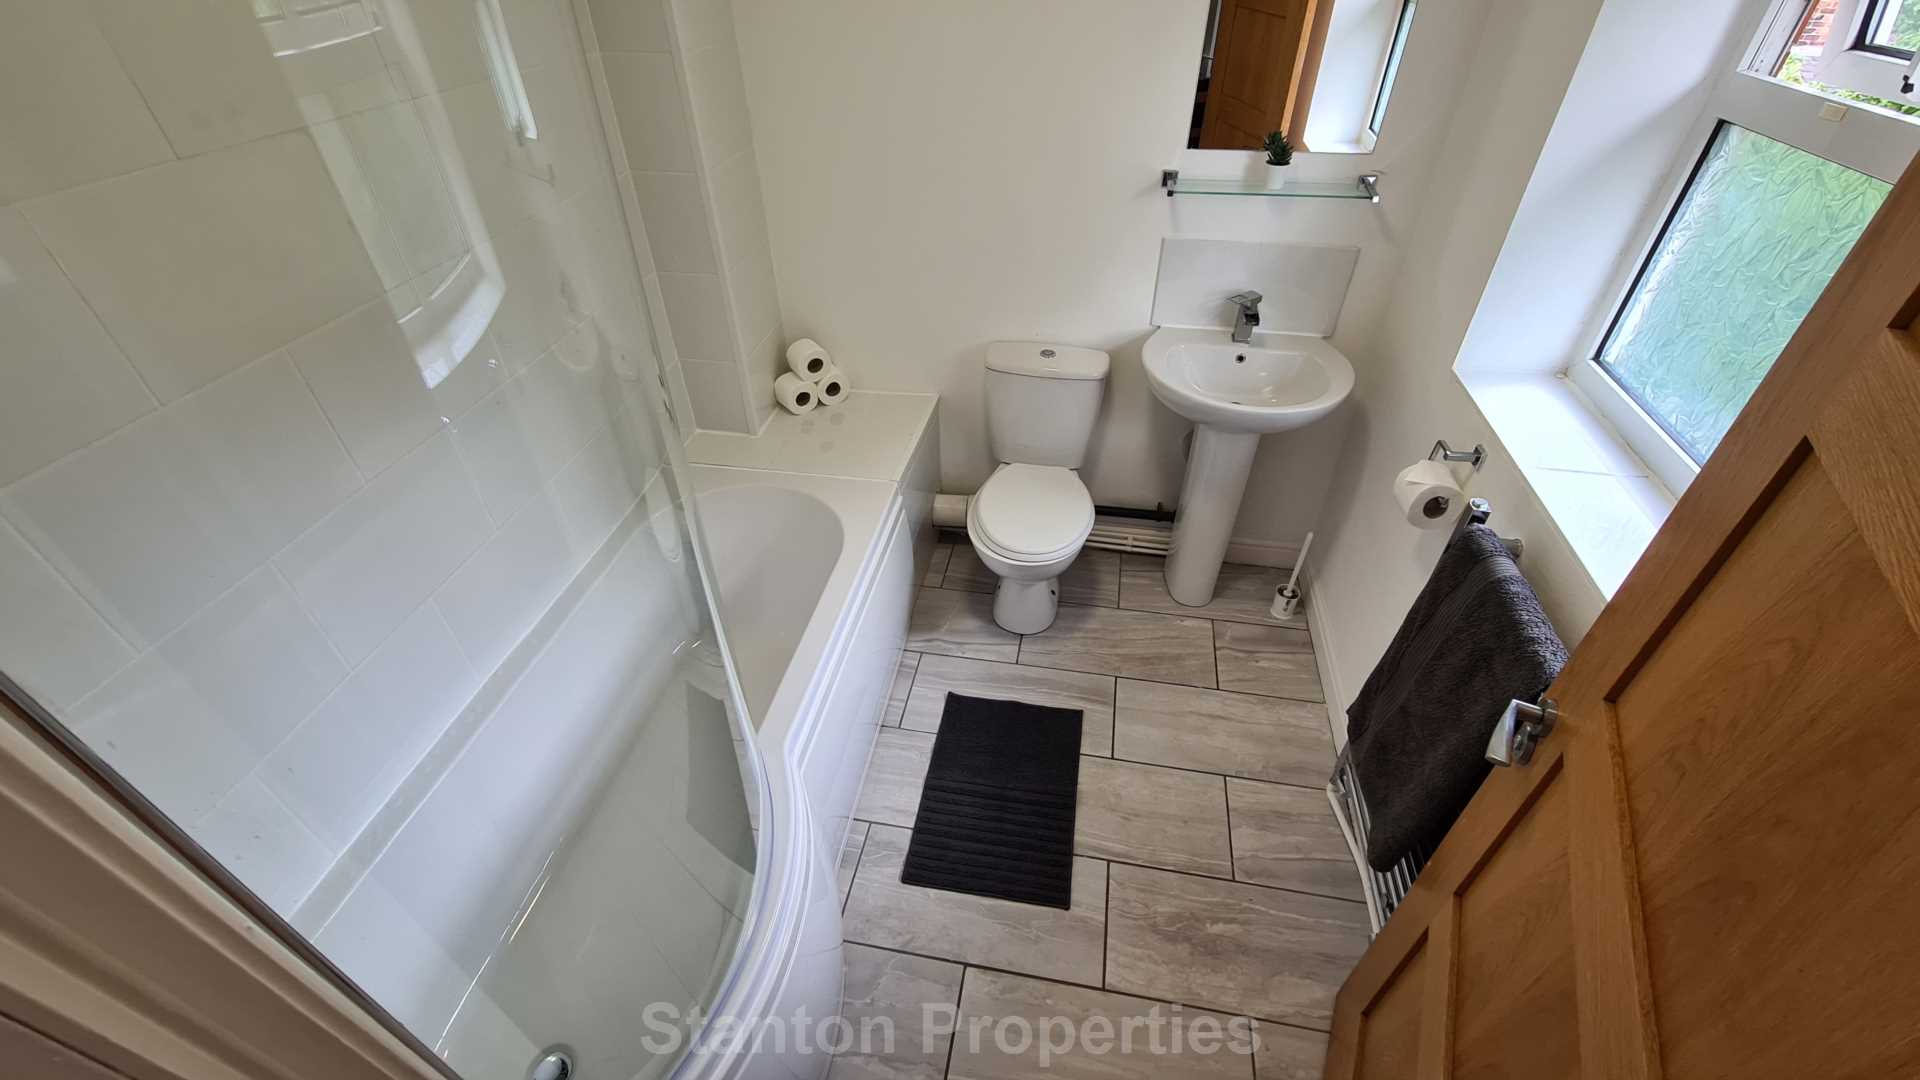 £155 pppw, See Video Tour, Granville Road, Fallowfield, Image 15